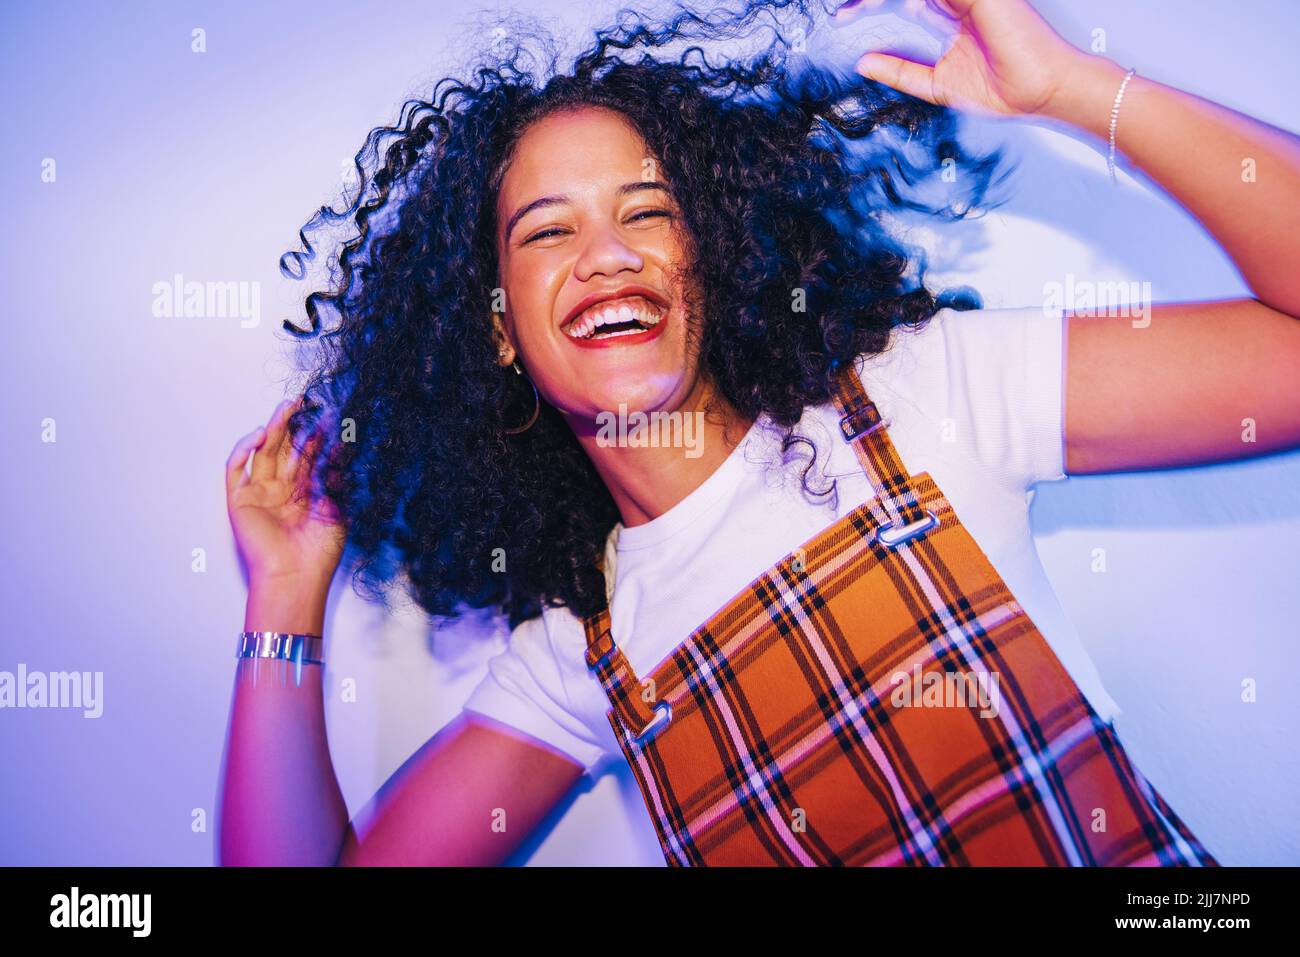 Young woman dancing and whipping her hair happily. Cheerful young woman laughing joyfully while standing alone in bright neon light. Carefree young wo Stock Photo